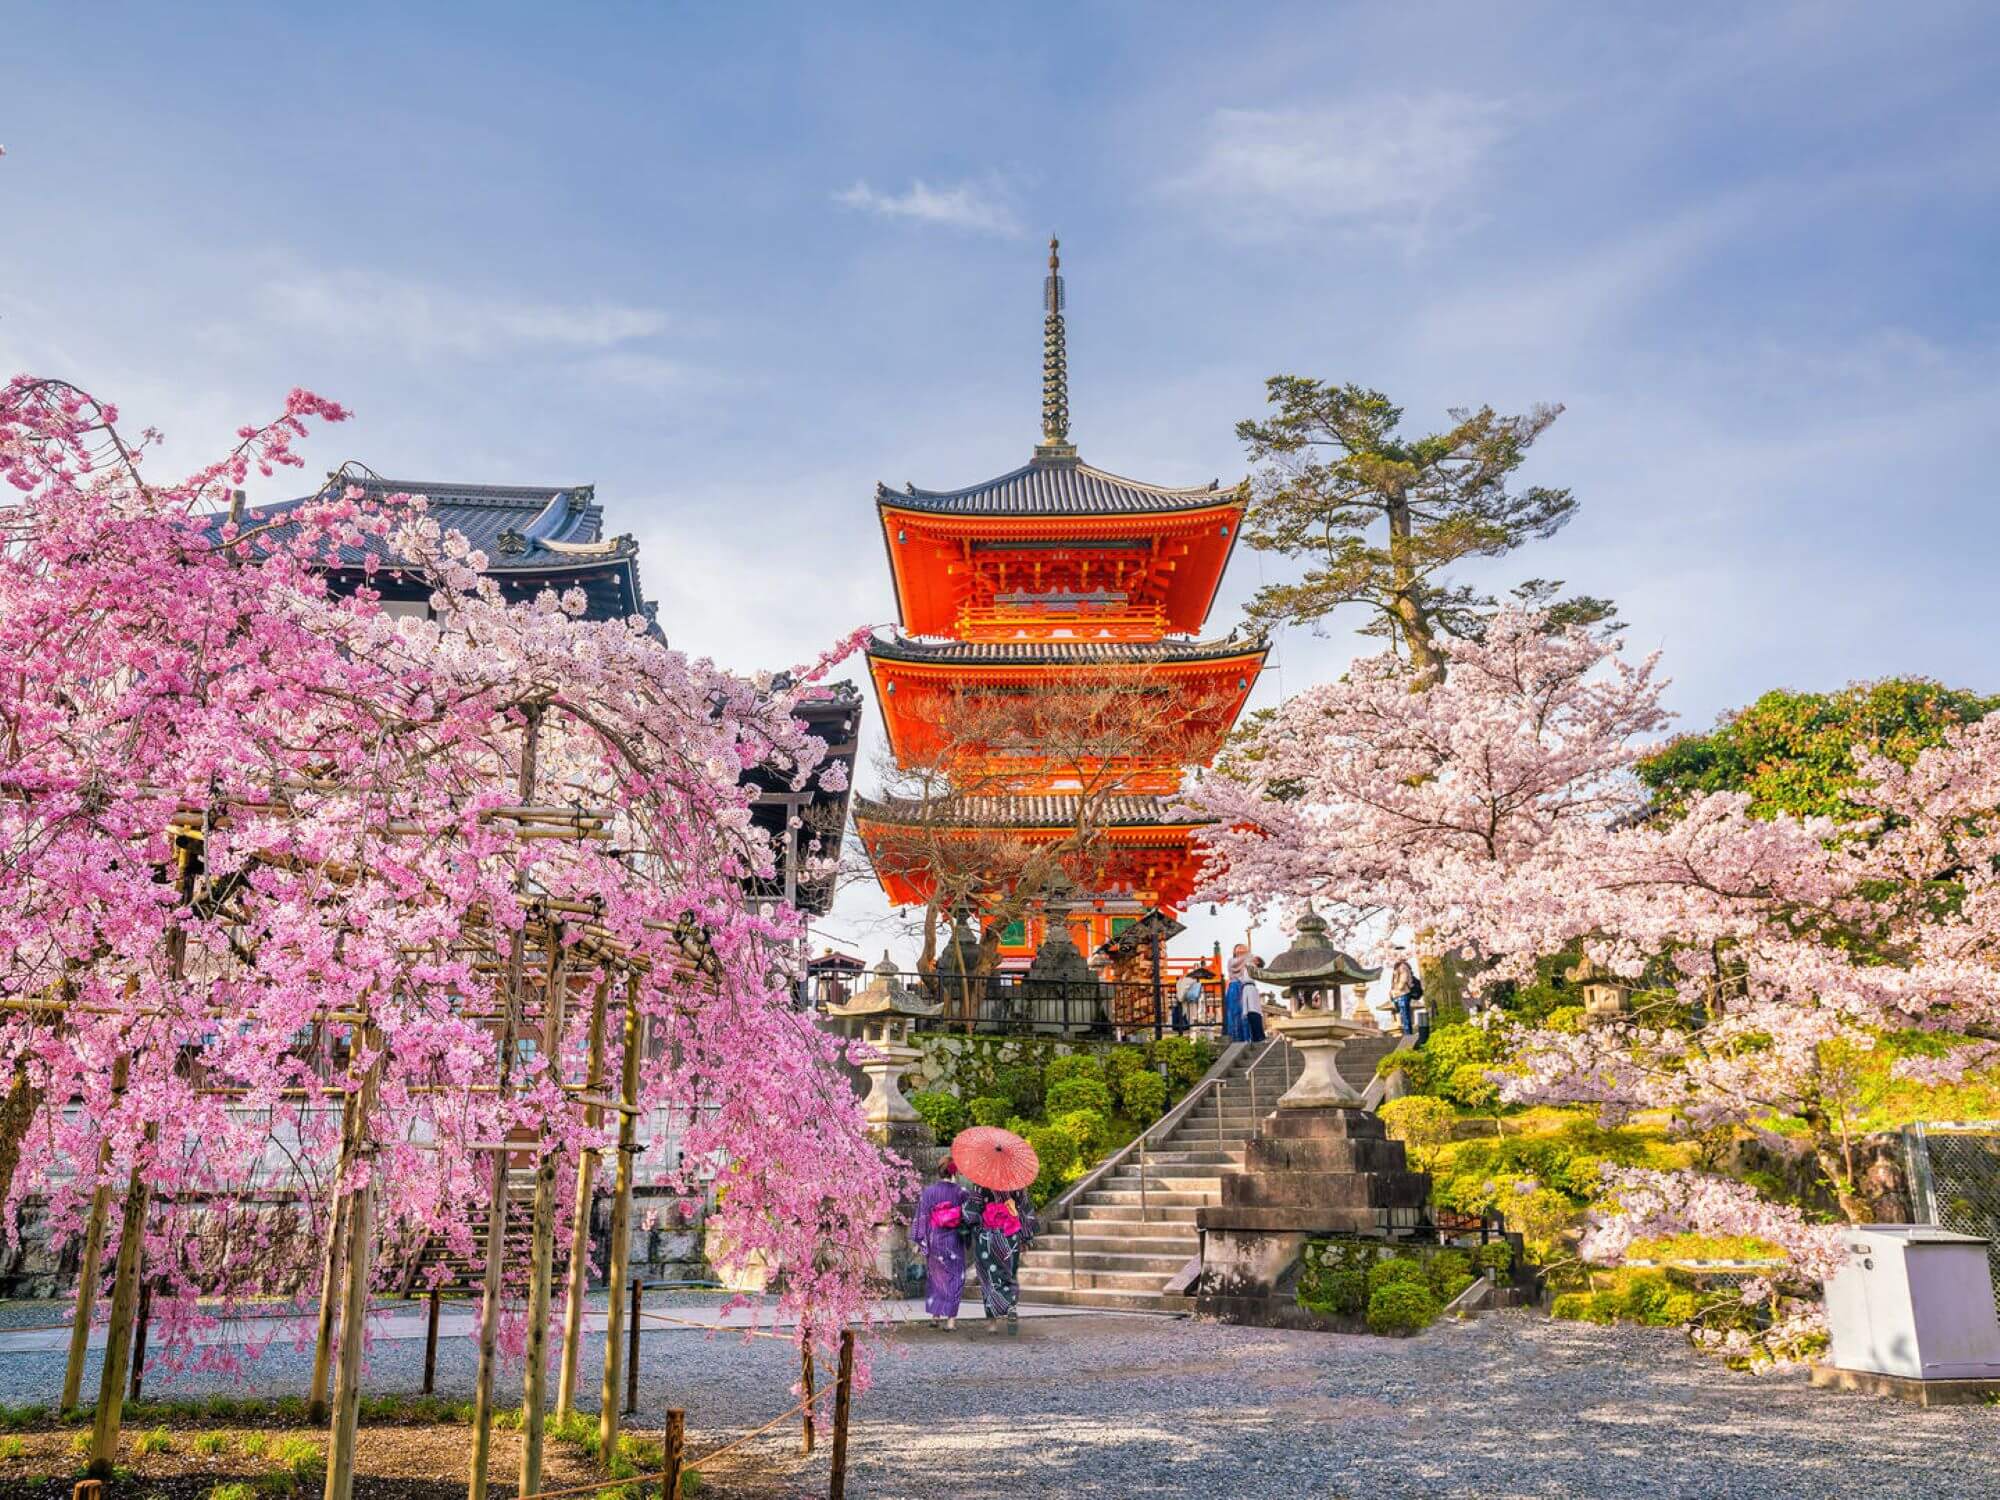 pointy Japanese red tower surrounded by cherry blossom trees in full bloom